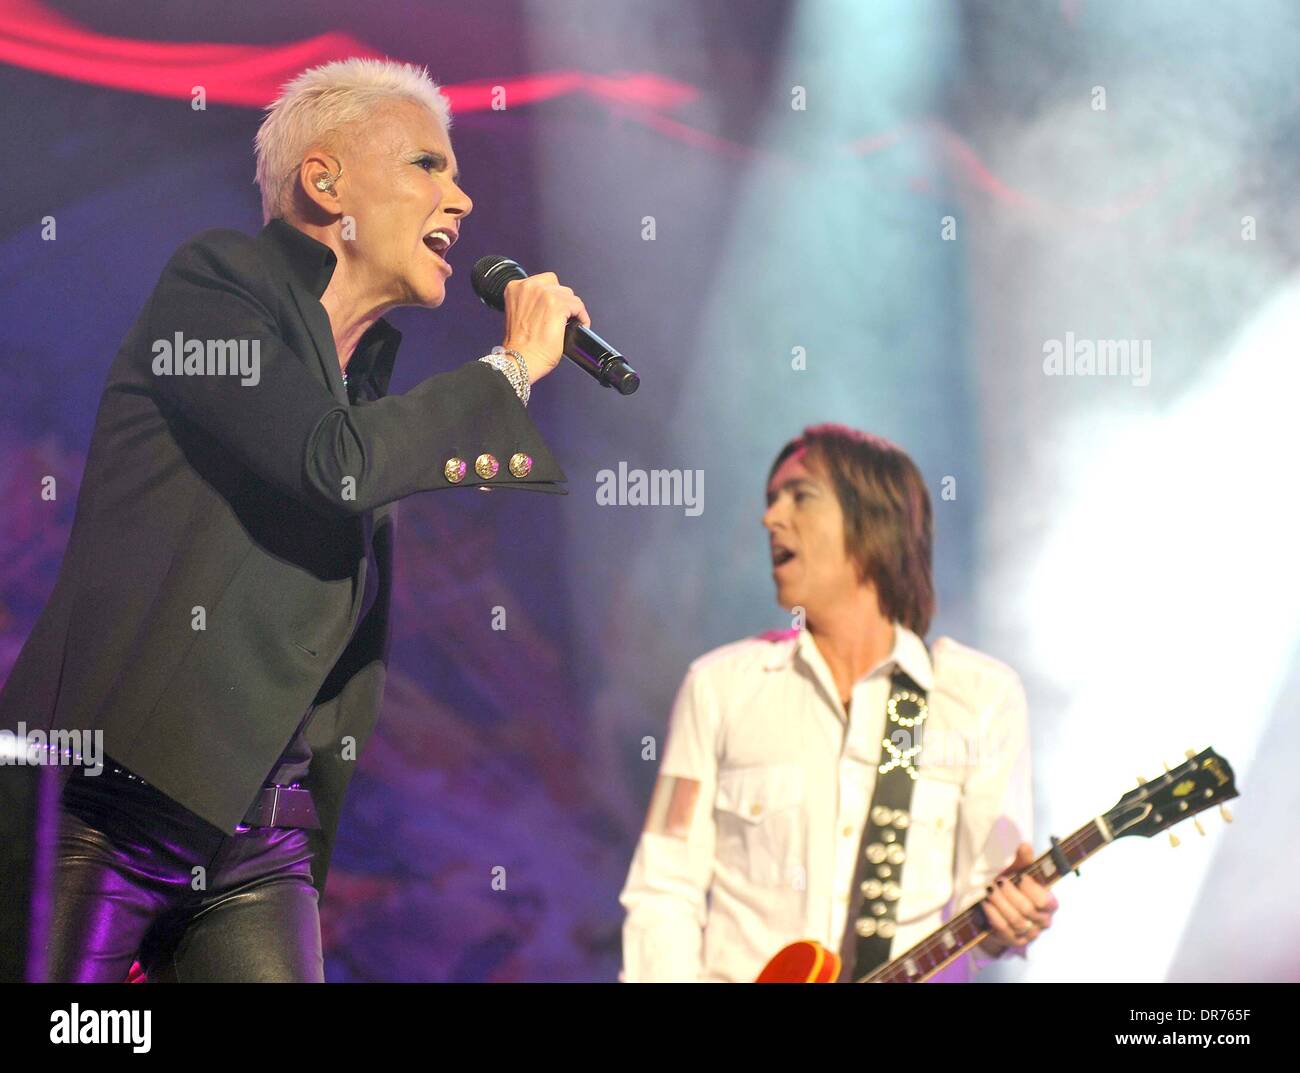 Marie Fredriksson and Per Gessle of  Roxette performs live at the 02 Arena in Dublin Dublin, Ireland - 09.07.12 Stock Photo